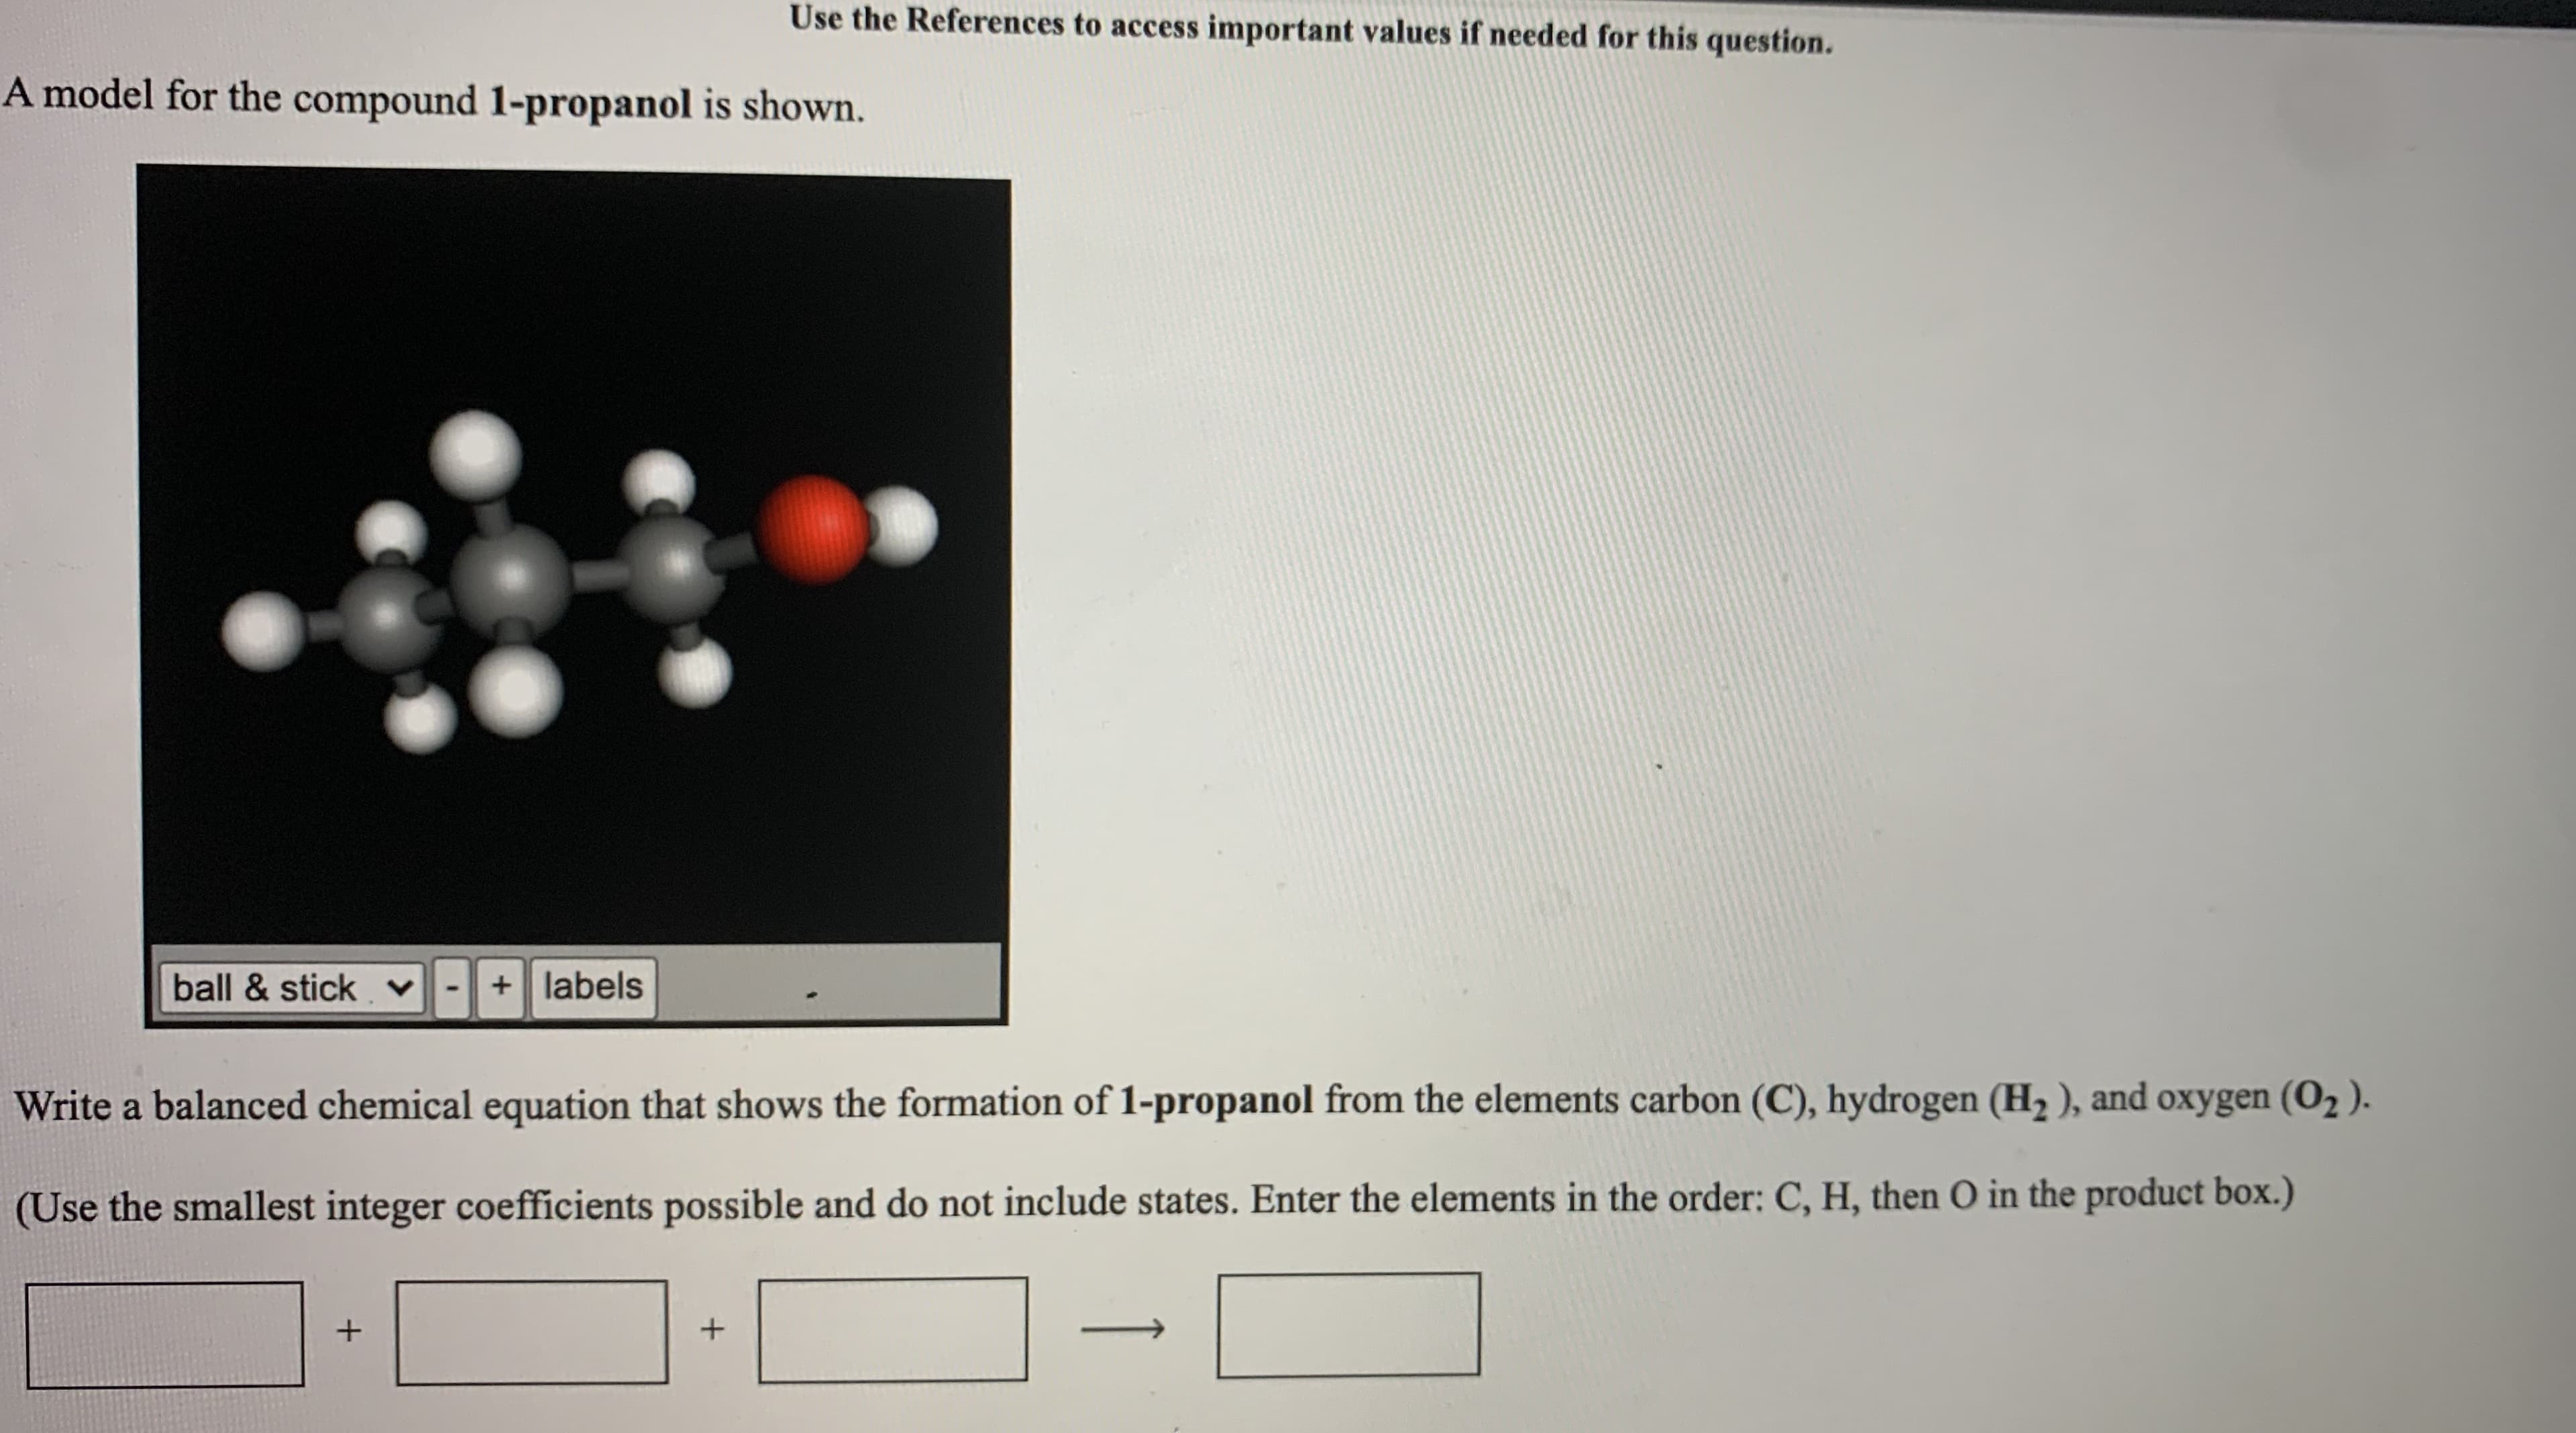 ---

### Understanding the Formation of 1-Propanol

#### Structural Model of 1-Propanol
A model for the compound **1-propanol** is depicted below:

![1-Propanol Molecular Model](Model_Image_URL)

In the ball-and-stick model shown:
- Grey spheres represent carbon (C) atoms.
- White spheres represent hydrogen (H) atoms.
- Red sphere represents the oxygen (O) atom.

#### Chemical Equation for the Formation of 1-Propanol
To write a balanced chemical equation for the formation of **1-propanol** (C₃H₇OH) from its elemental components — carbon (C), hydrogen (H₂), and oxygen (O₂) — follow these steps. 

Use the smallest integer coefficients possible and place the elements in the order C, H, then O in the product box.

\[ \square \ C + \square \ H_{2} + \square \ O_{2} \rightarrow \square \ C_{3}H_{8}O \]

Fill in the coefficients to balance the equation.

---

By viewing this molecular structure and understanding the formation process, students can better grasp essential concepts in chemistry related to the synthesis and composition of organic compounds.

